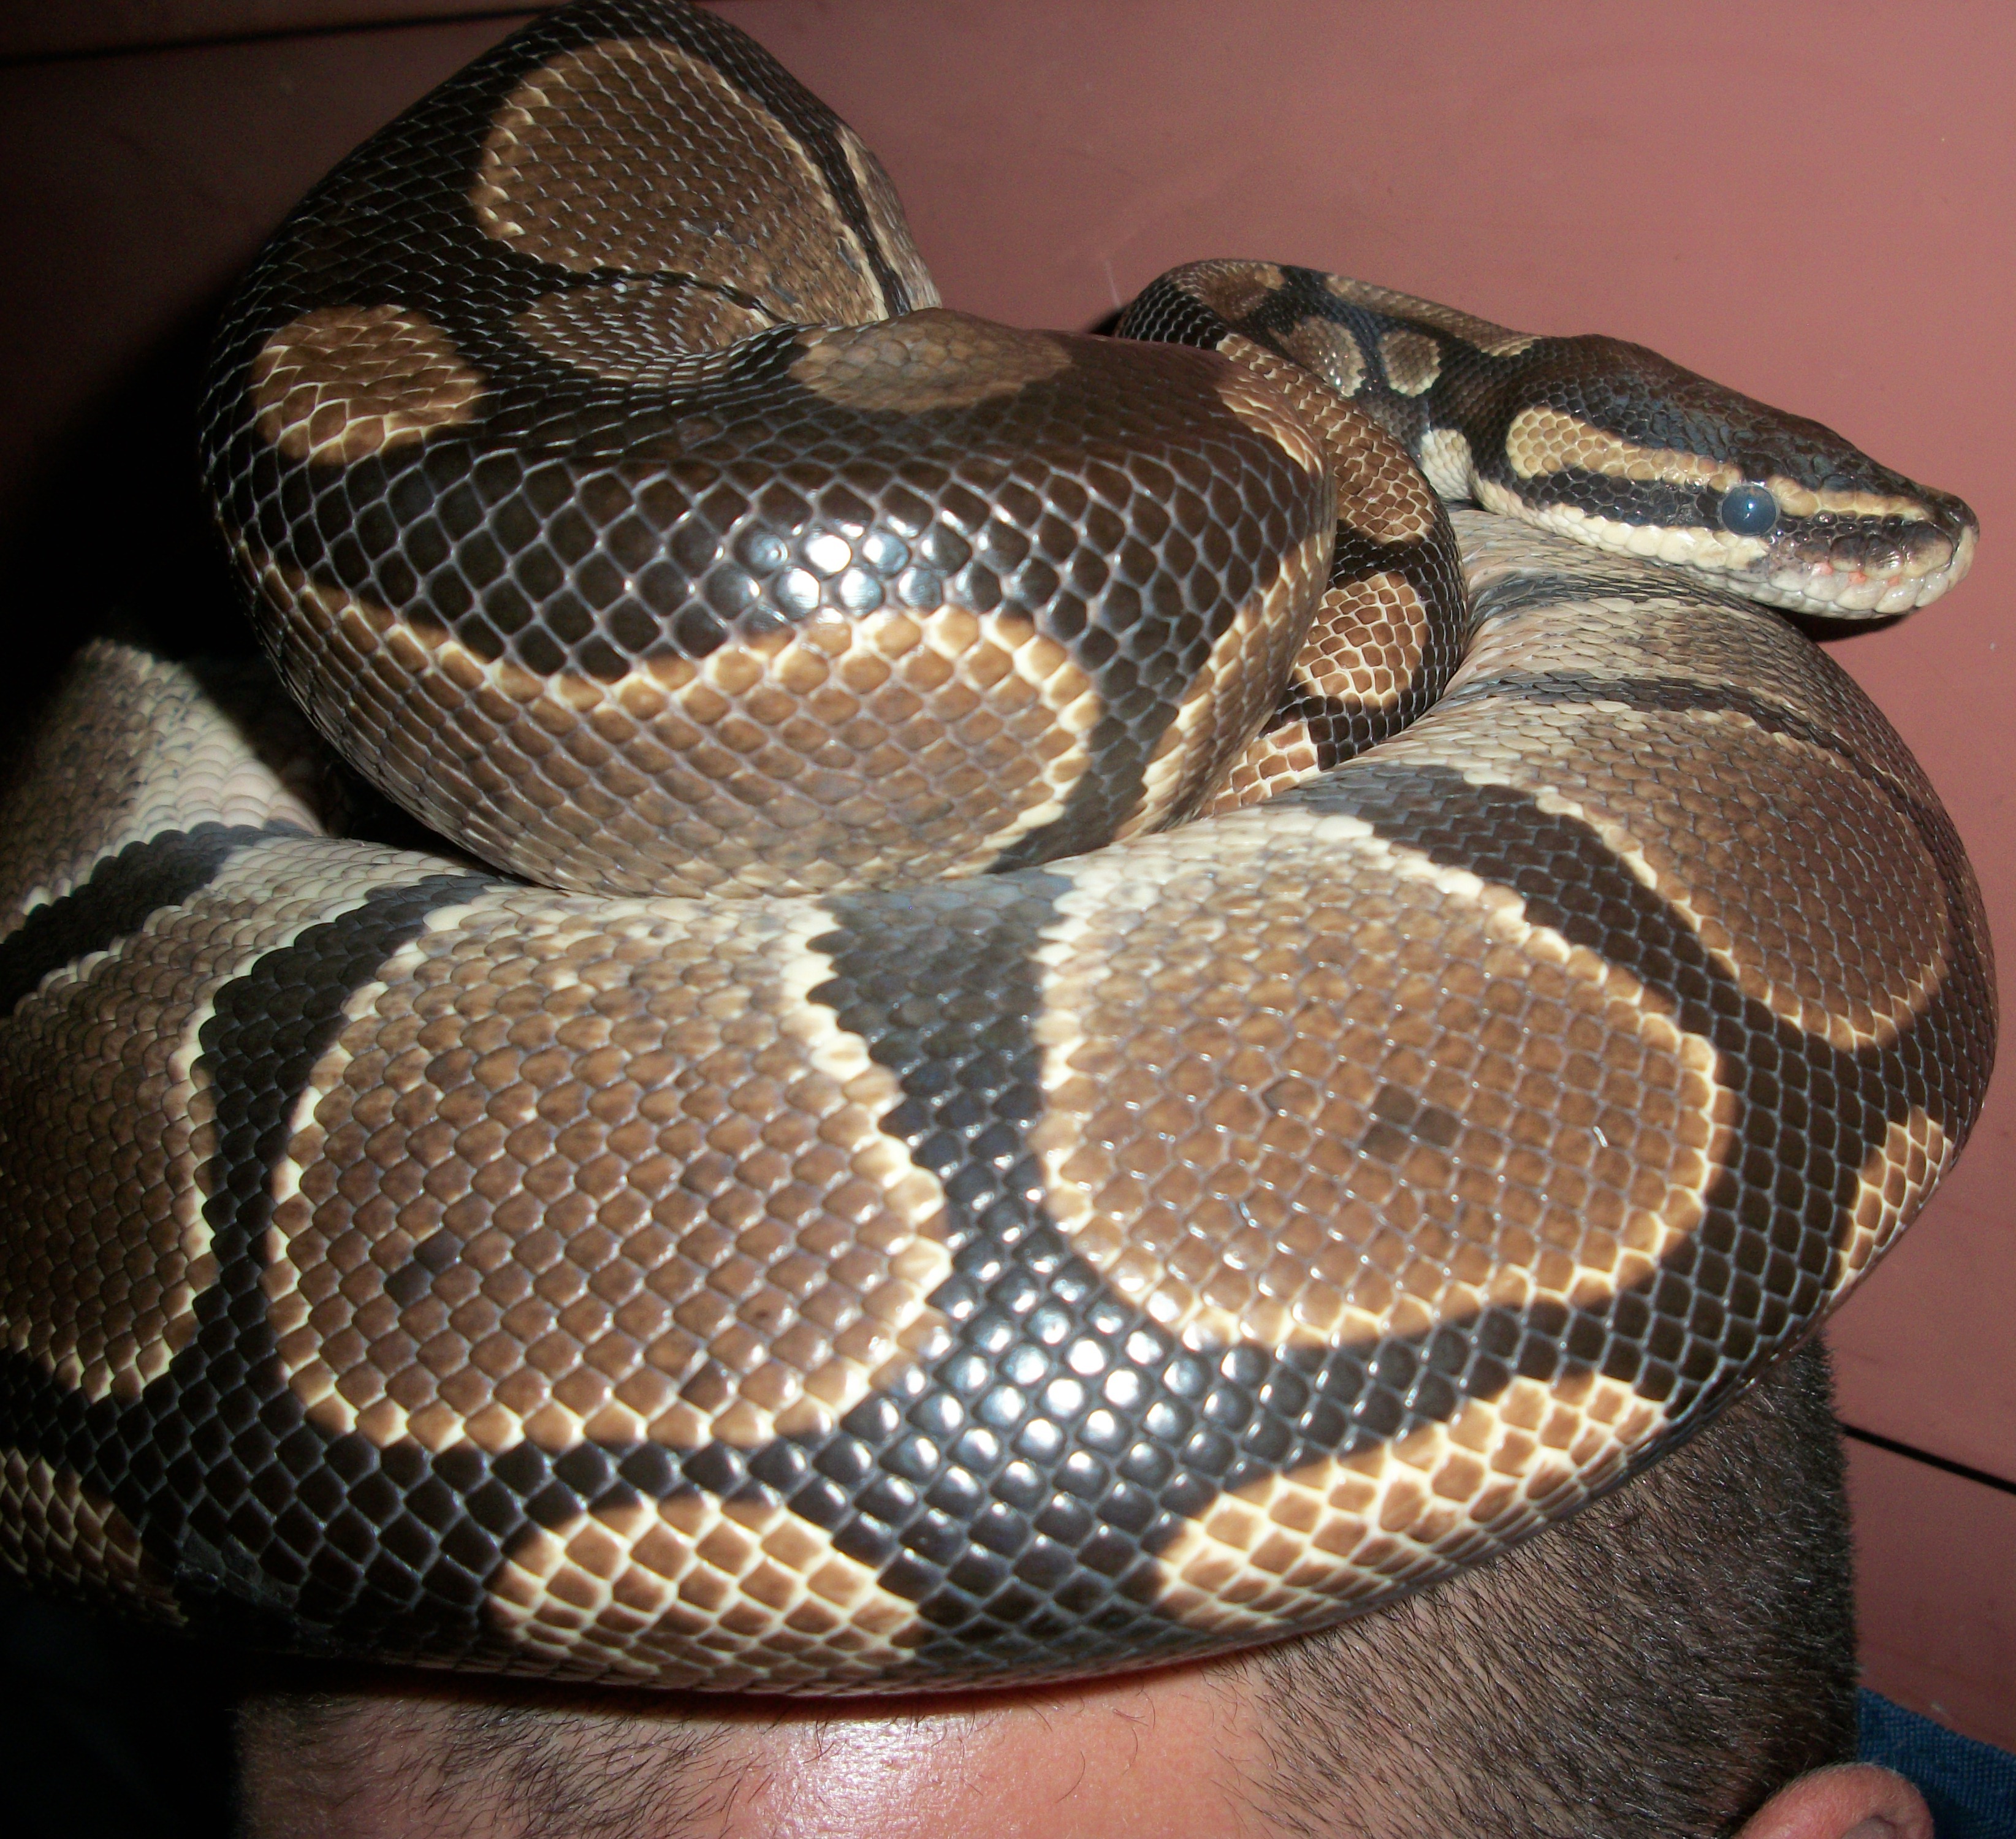 What I Learned About Snakes By Snuggling a Python #ReptileCare